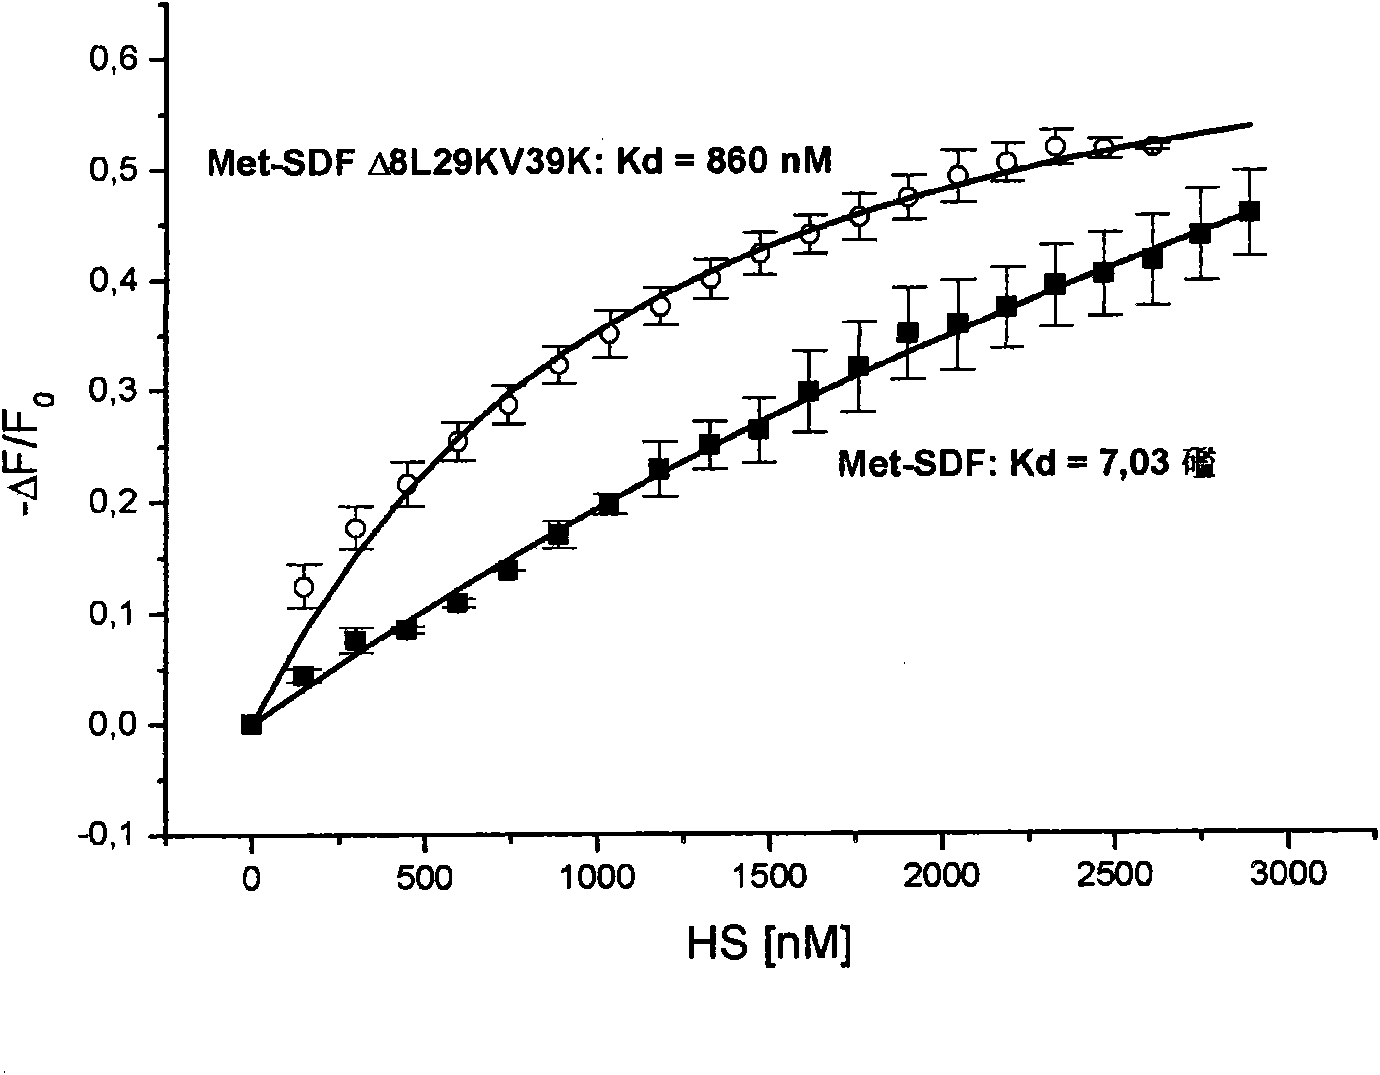 SDF-1-based glycosaminoglycan antagonists and methods of using same